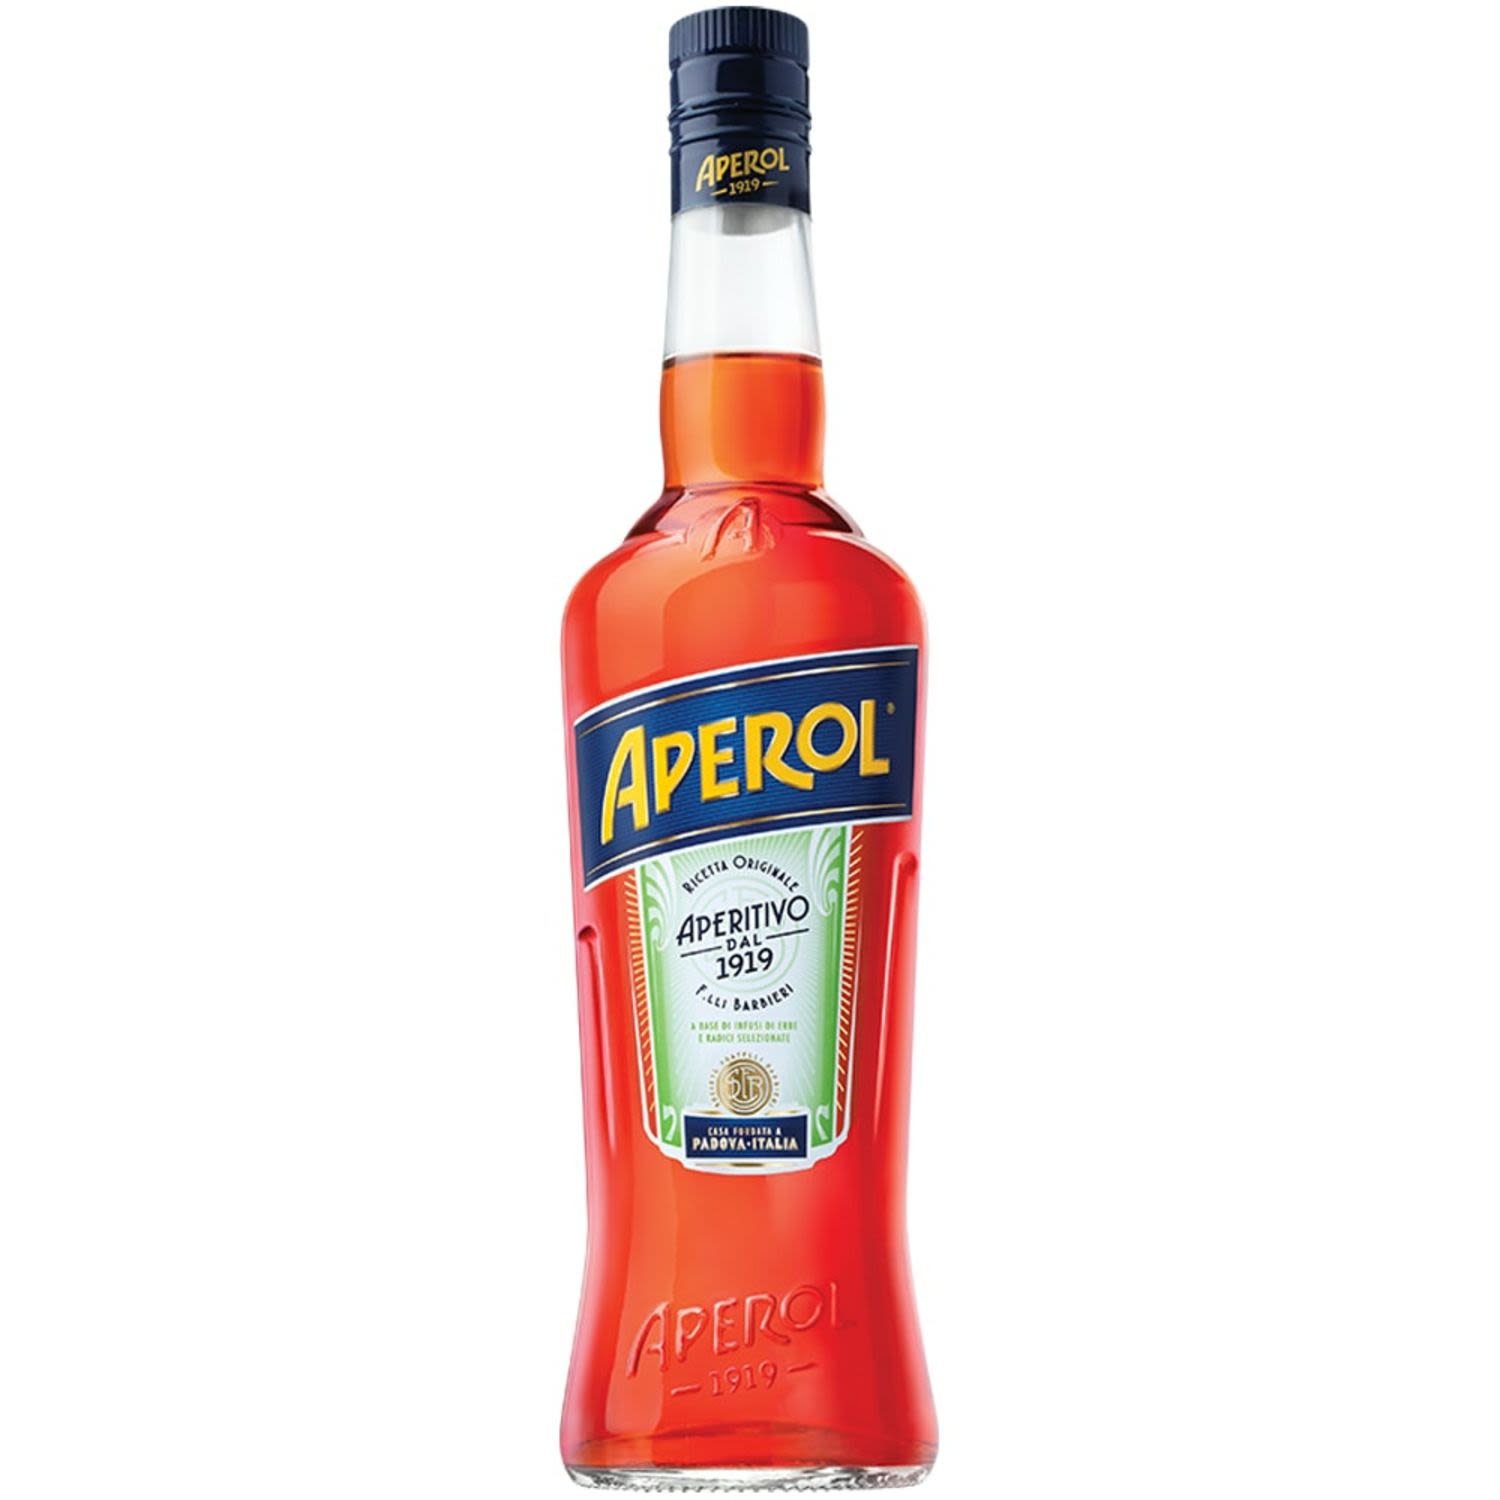 An Italian classic, Aperol Spritz is a sophisticated, light & refreshing drink.  Sunny, lively and social, Aperol Spritz is the perfect drink to bring a touch of Italian style to any occasion. Aperol Spritz is best enjoyed during Apertivo, Italy’s iconic take on happy hour. Enjoy your own Aperitivo moment by sharing an Aperol Spritz with friends, while enjoying a delicious antipasto platter filled with cheese, olives, cured meats and artisan breads. Aperol’s perfect blend of 16 ingredients, including bitter orange, rhubarb and an array of botanicals gives Aperol Spritz a unique orange colour and bittersweet taste. Its secret recipe has remained unchanged since it was created in 1919.<br /> <br />Alcohol Volume: 11.00%<br /><br />Pack Format: Bottle<br /><br />Standard Drinks: 6.1</br /><br />Pack Type: Bottle<br /><br />Country of Origin: Italy<br />